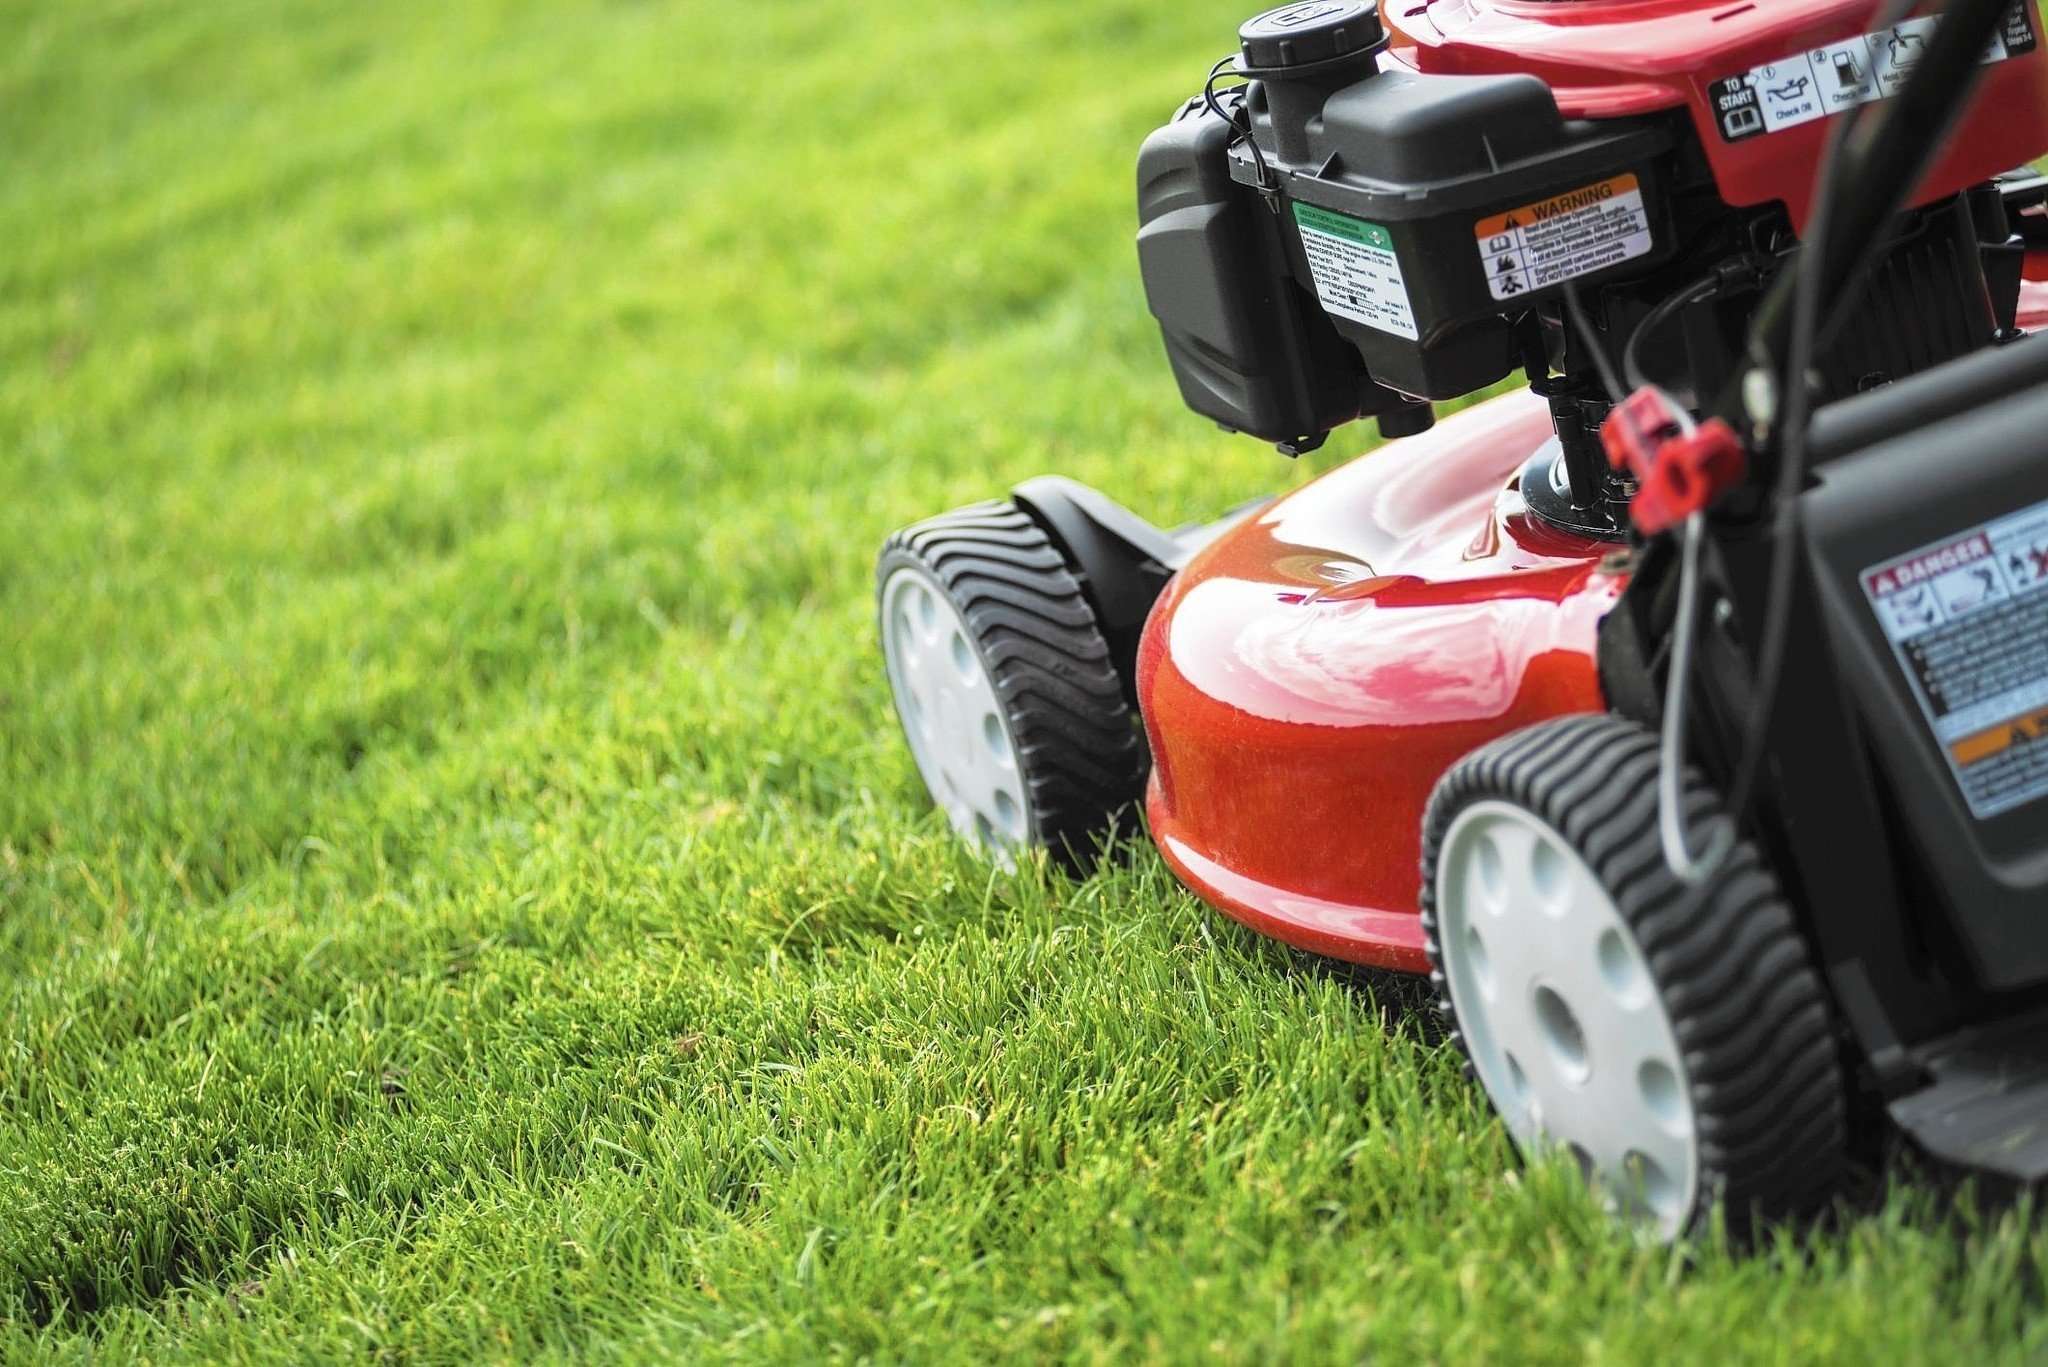 New lawn mowers are easier to use, quieter